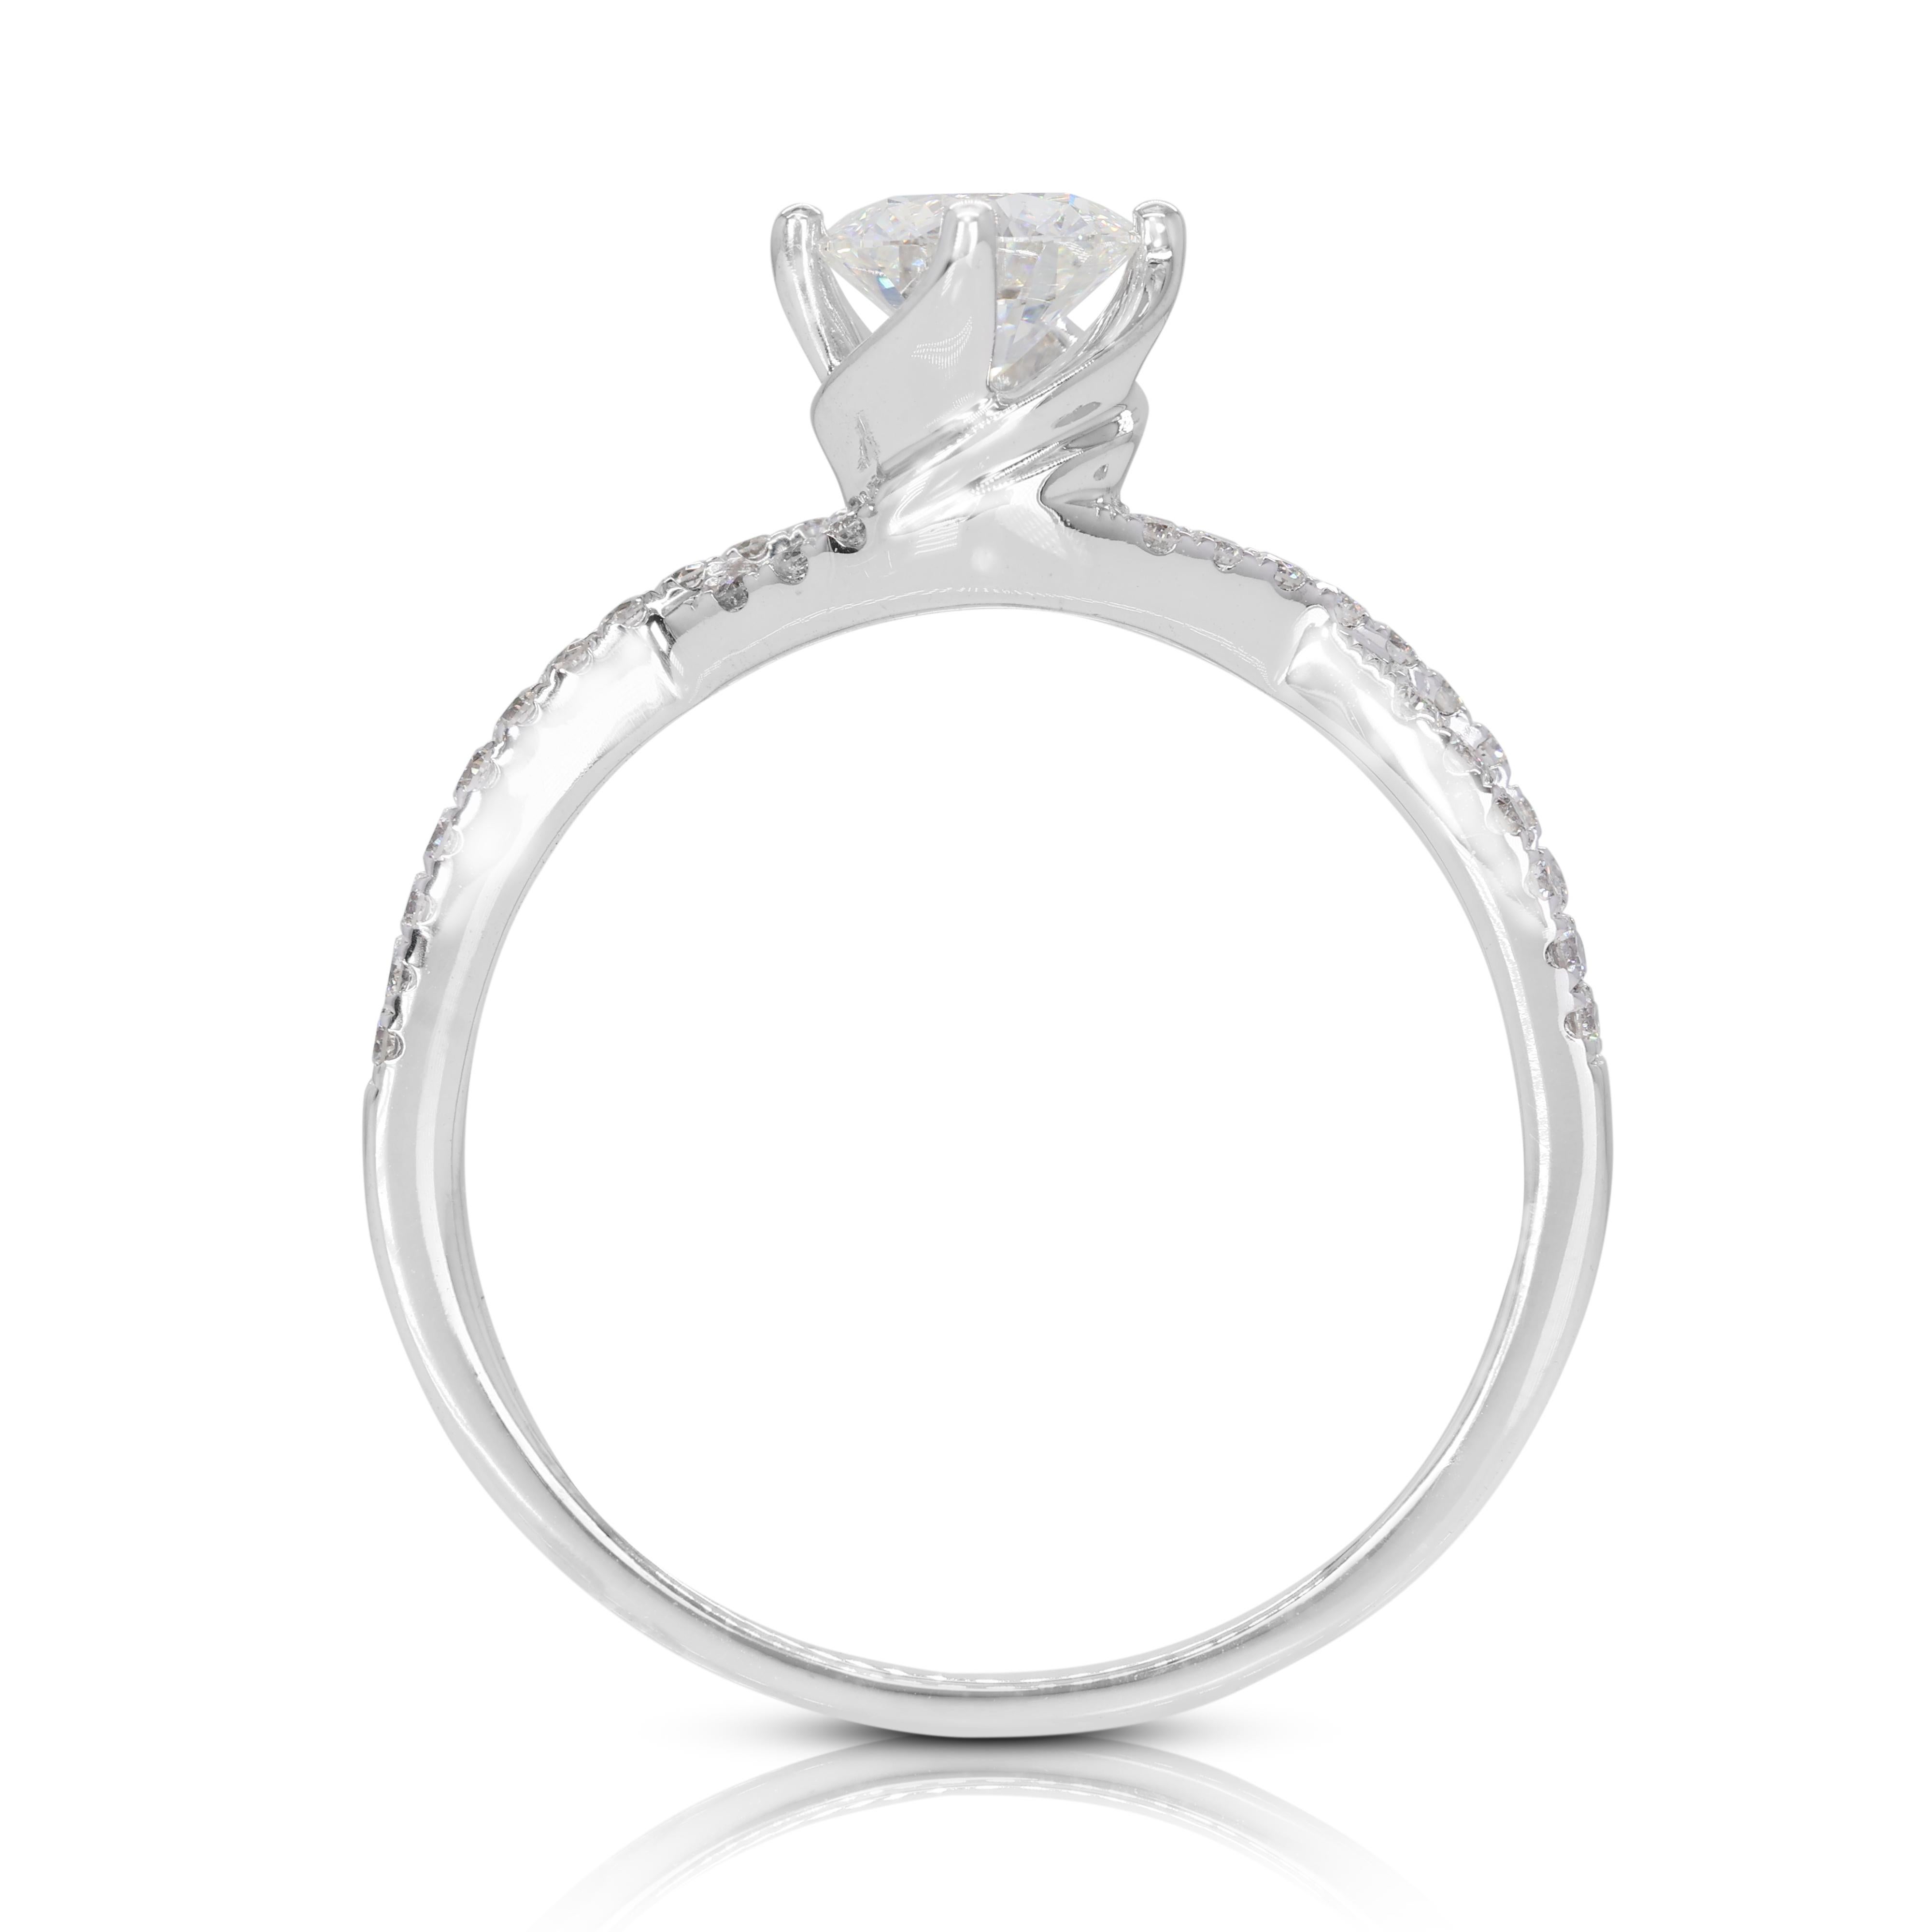 Elegant 0.70ct Diamond Halo Ring set in 18K White Gold In Excellent Condition For Sale In רמת גן, IL